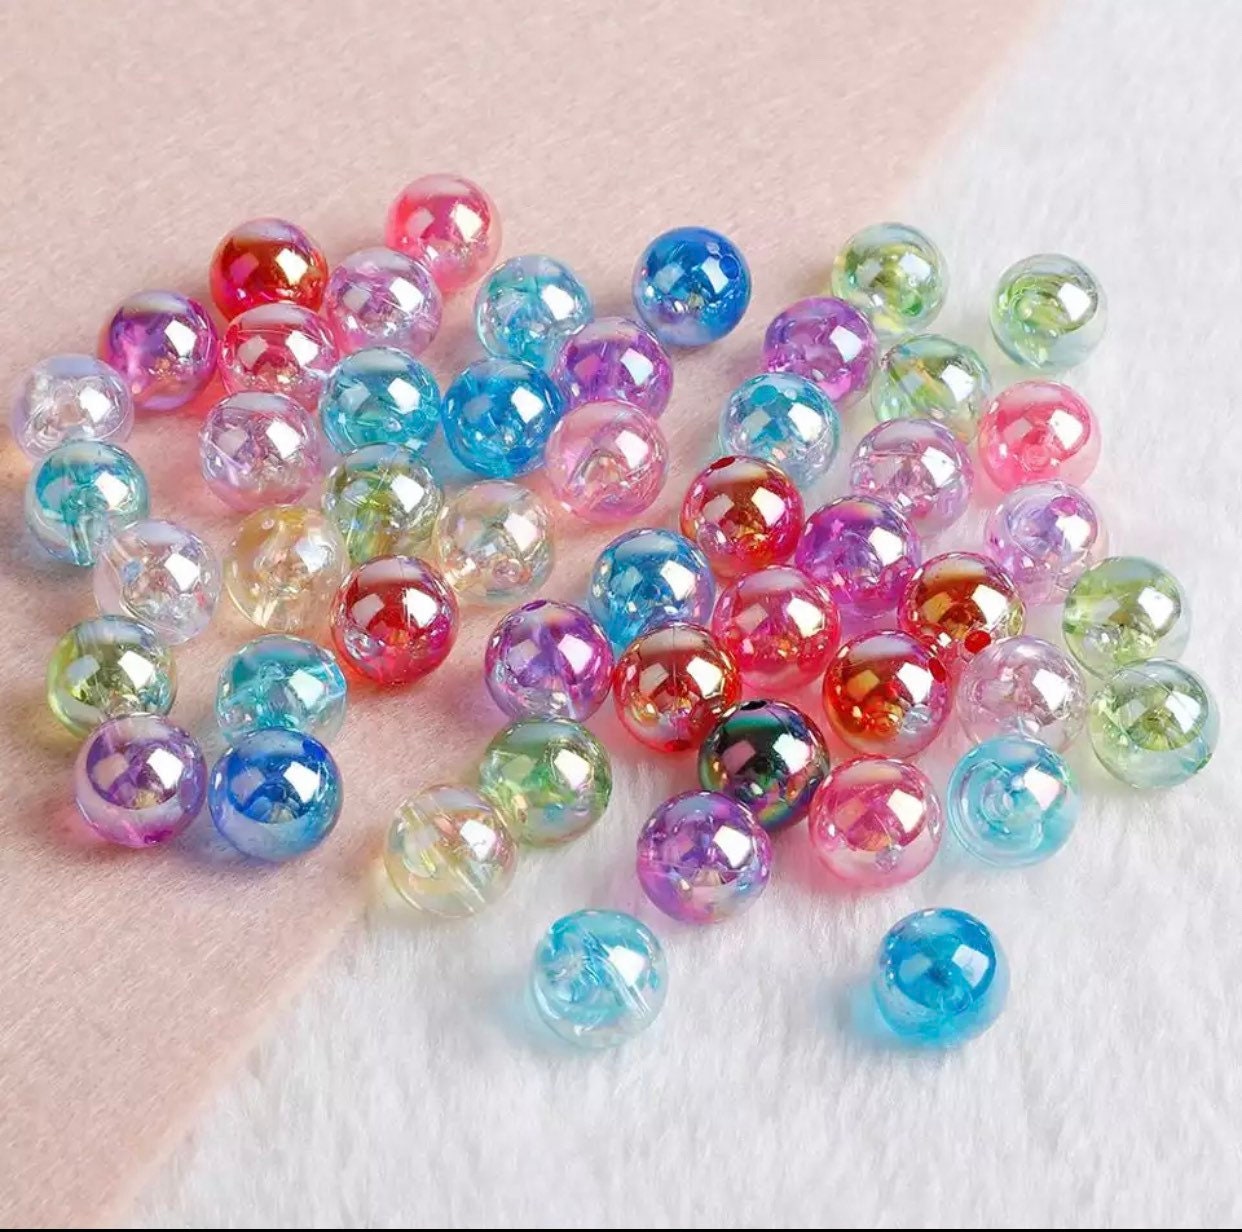 700 Pieces Glass Beads for Jewelry Making, 28 Colors 8mm Crystal Bracelet  and DIY Craft Beads Kit